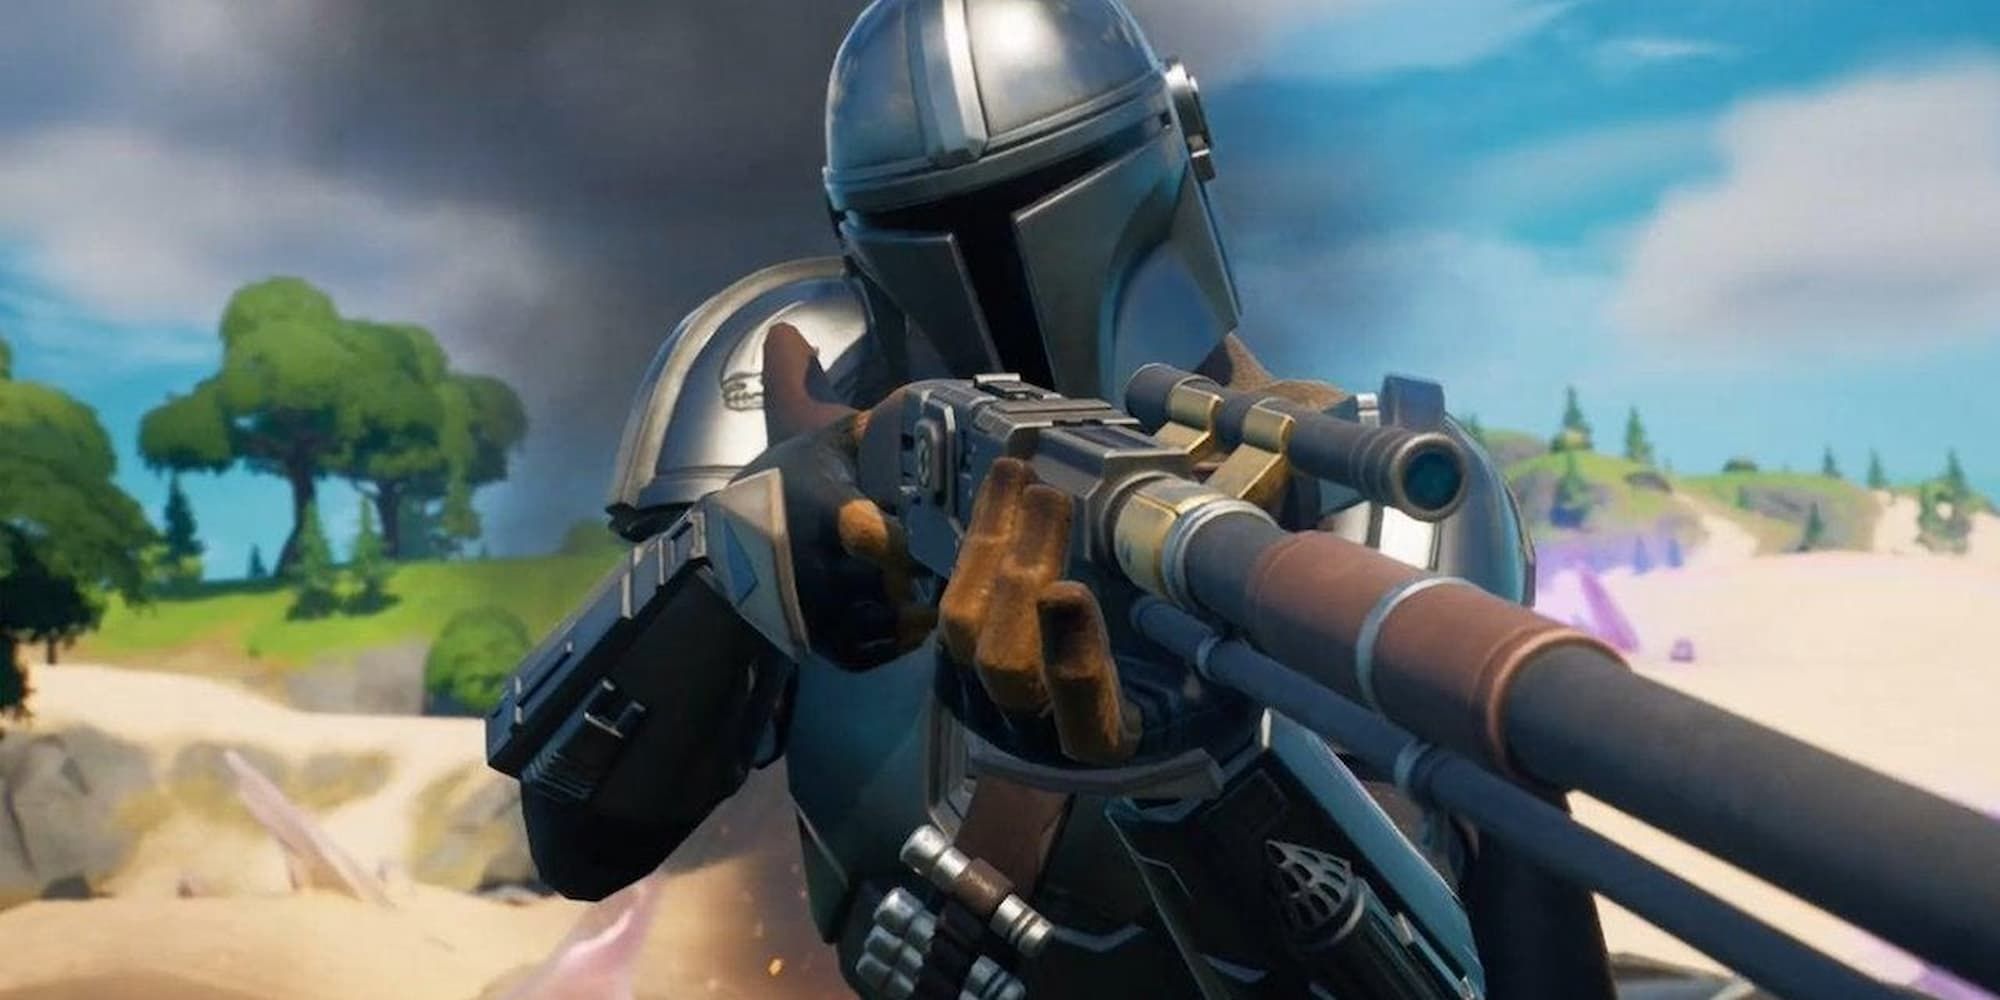 The Mandalorian aims down the scope of a rifle in Fortnite.